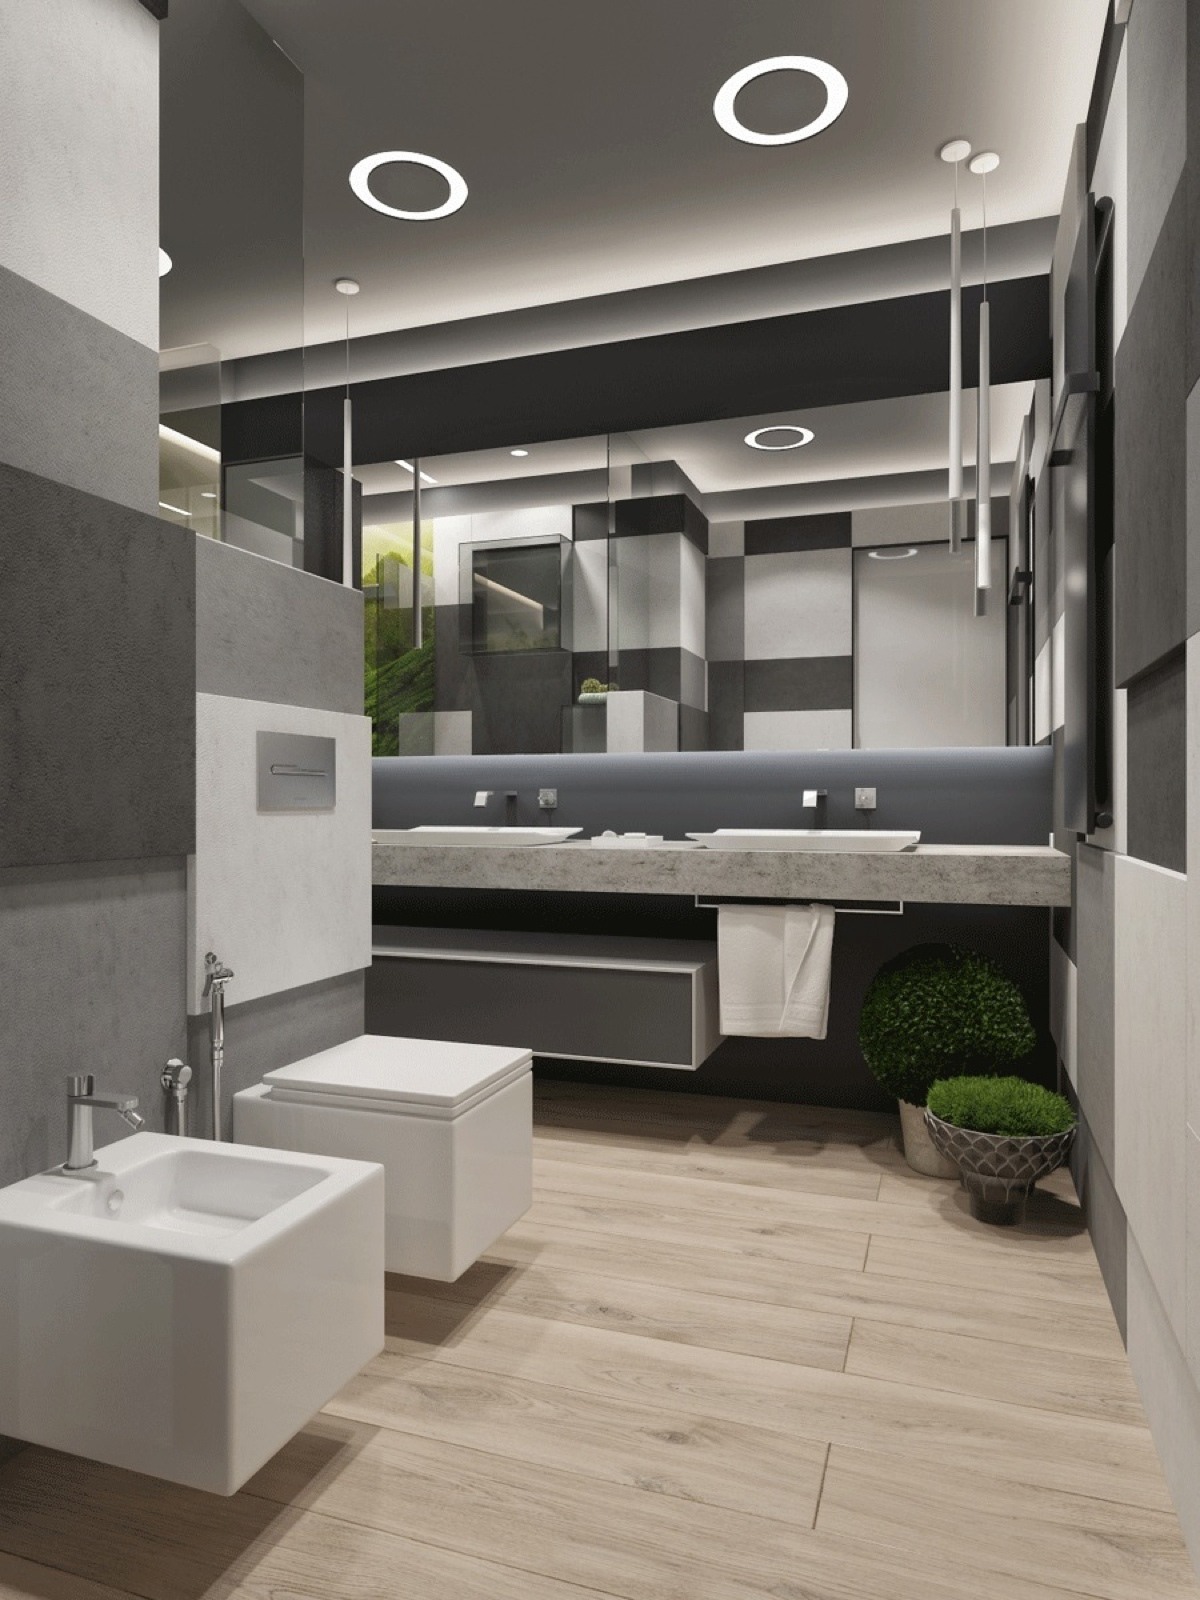 contemporary wooden bathroom "width =" 1200 "height =" 1600 "srcset =" https://mileray.com/wp-content/uploads/2020/05/1588516292_837_Contemporary-Bathroom-Decor-Ideas-Combined-With-Wooden-Accents-Become-a.jpg 1200w , https://mileray.com/wp-content/uploads/2016/09/luxurious-gray-and-green-bathroom-Azovskiy-Pahomova-225x300.jpg 225w, https://mileray.com/wp-content / uploads / 2016/09 / luxurious-gray-and-green-bathroom-Azovskiy-Pahomova-768x1024.jpg 768w, https://mileray.com/wp-content/uploads/2016/09/luxurious-gray-and- greenes -Bathroom-Azovskiy-Pahomova-696x928.jpg 696w, https://mileray.com/wp-content/uploads/2016/09/luxurious-gray-and-green-bathroom-Azovskiy-Pahomova-1068x1424.jpg 1068w, https : //mileray.com/wp-content/uploads/2016/09/luxurious-gray-and-green-bathroom-Azovskiy-Pahomova-315x420.jpg 315w "sizes =" (maximum width: 1200px) 100vw, 1200px